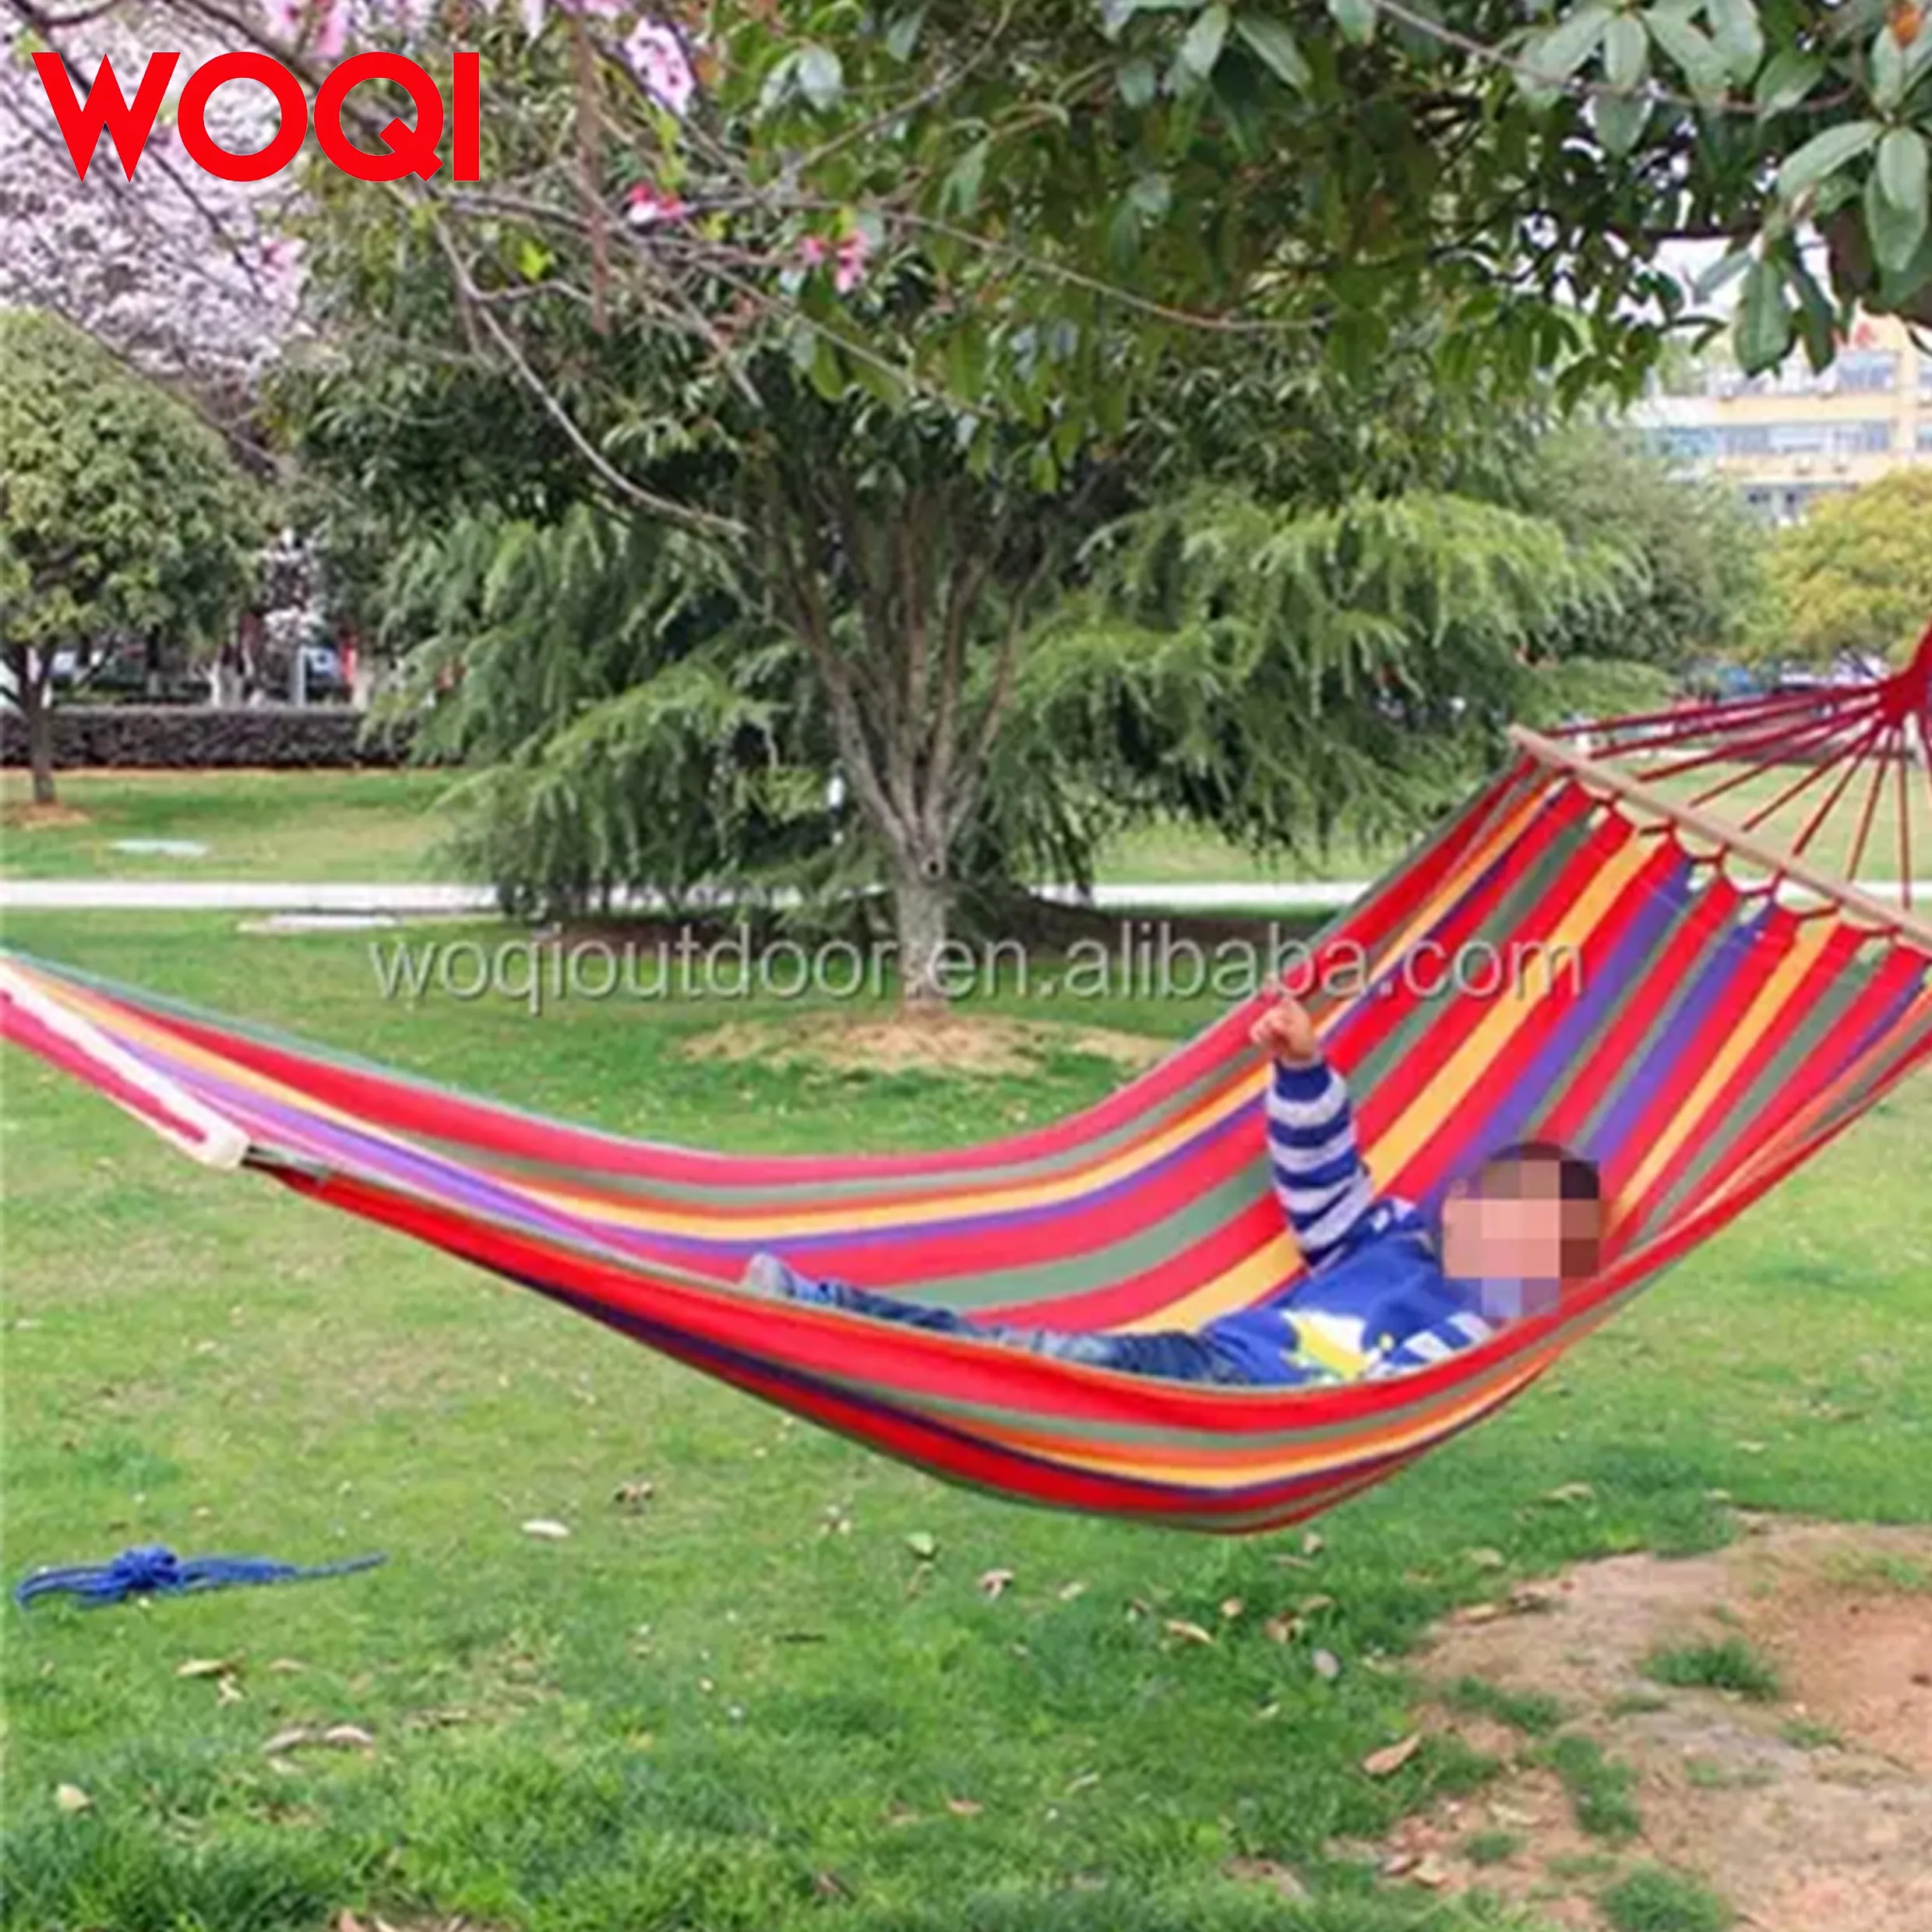 Woqi Portable Cotton Rope Outdoor Swing Fabric Camping Canvas Bed Hanging Hammock